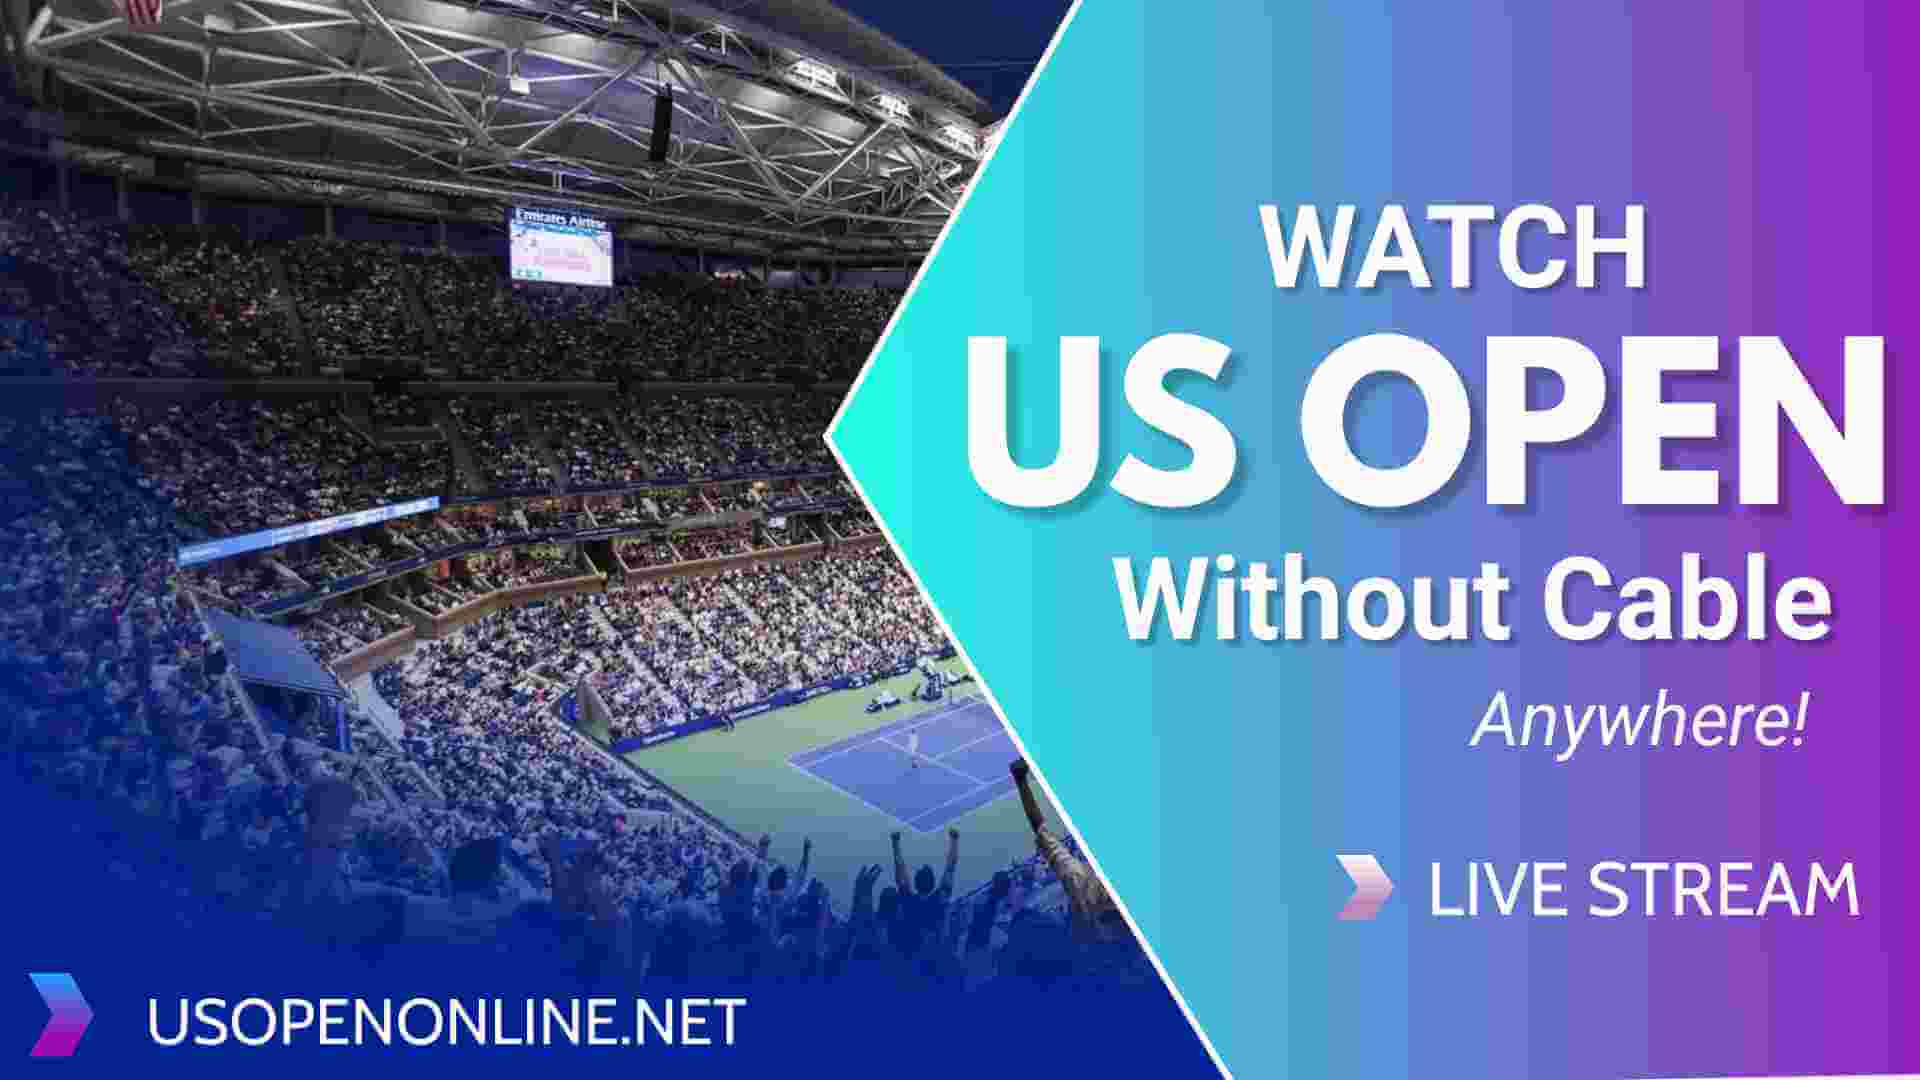 Watch US Open Tennis 2018 Without Cable